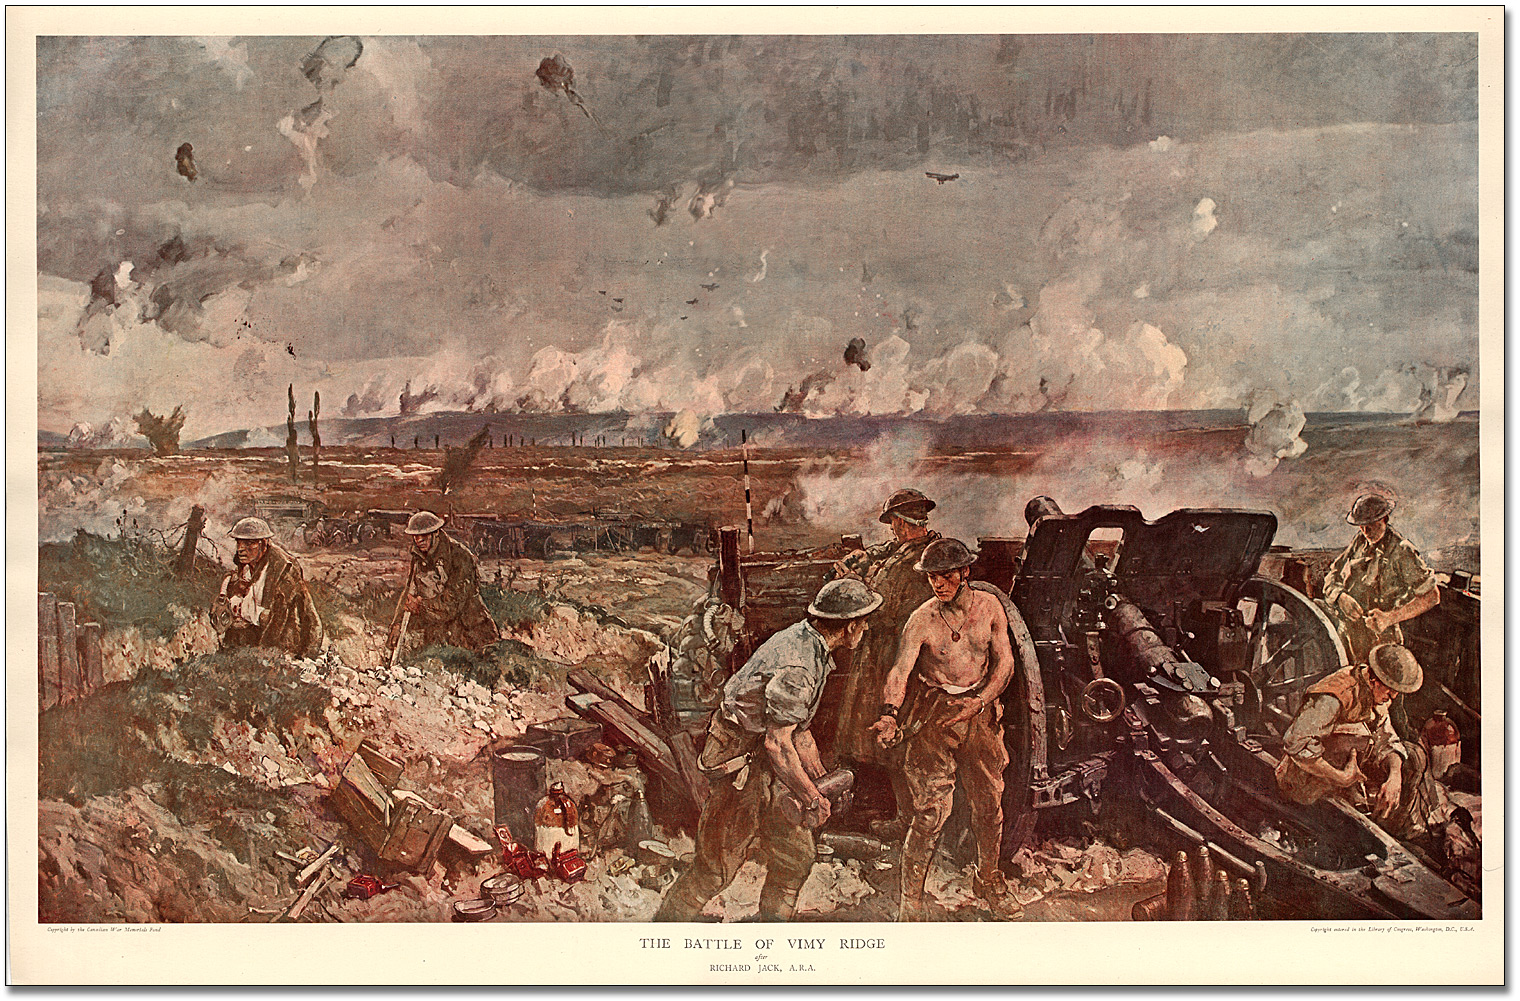 The Battle of Vimy Ridge after Richard Jack, A.R.A., 1917